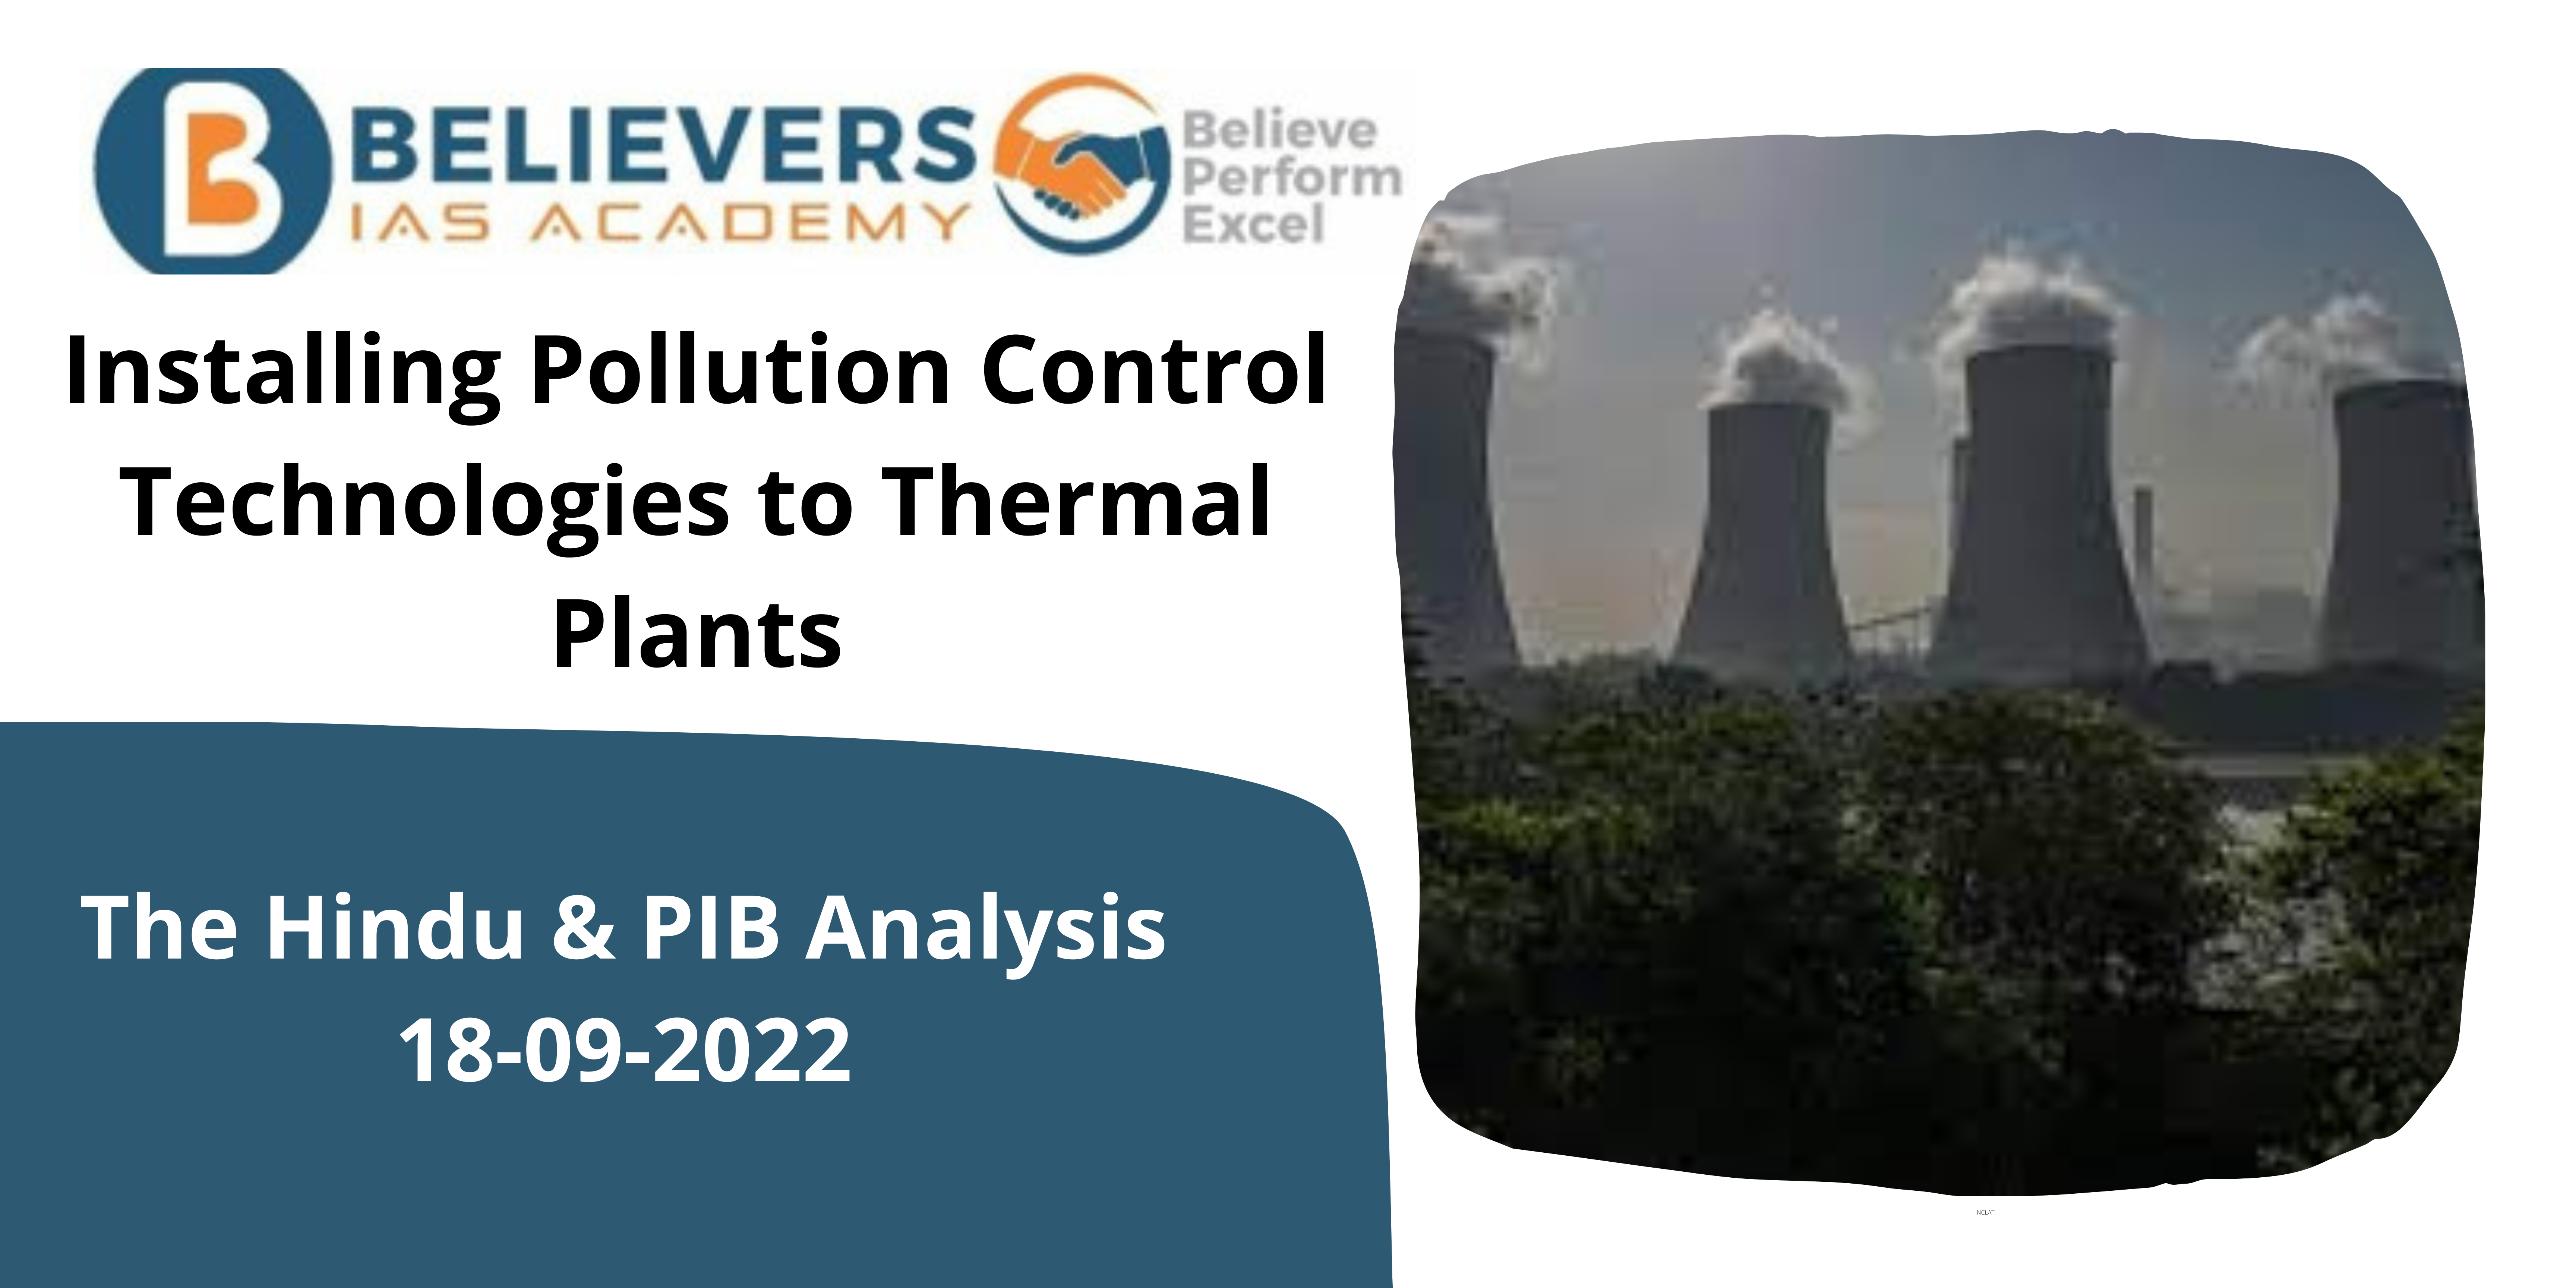 Installing Pollution Control Technologies to Thermal Plants